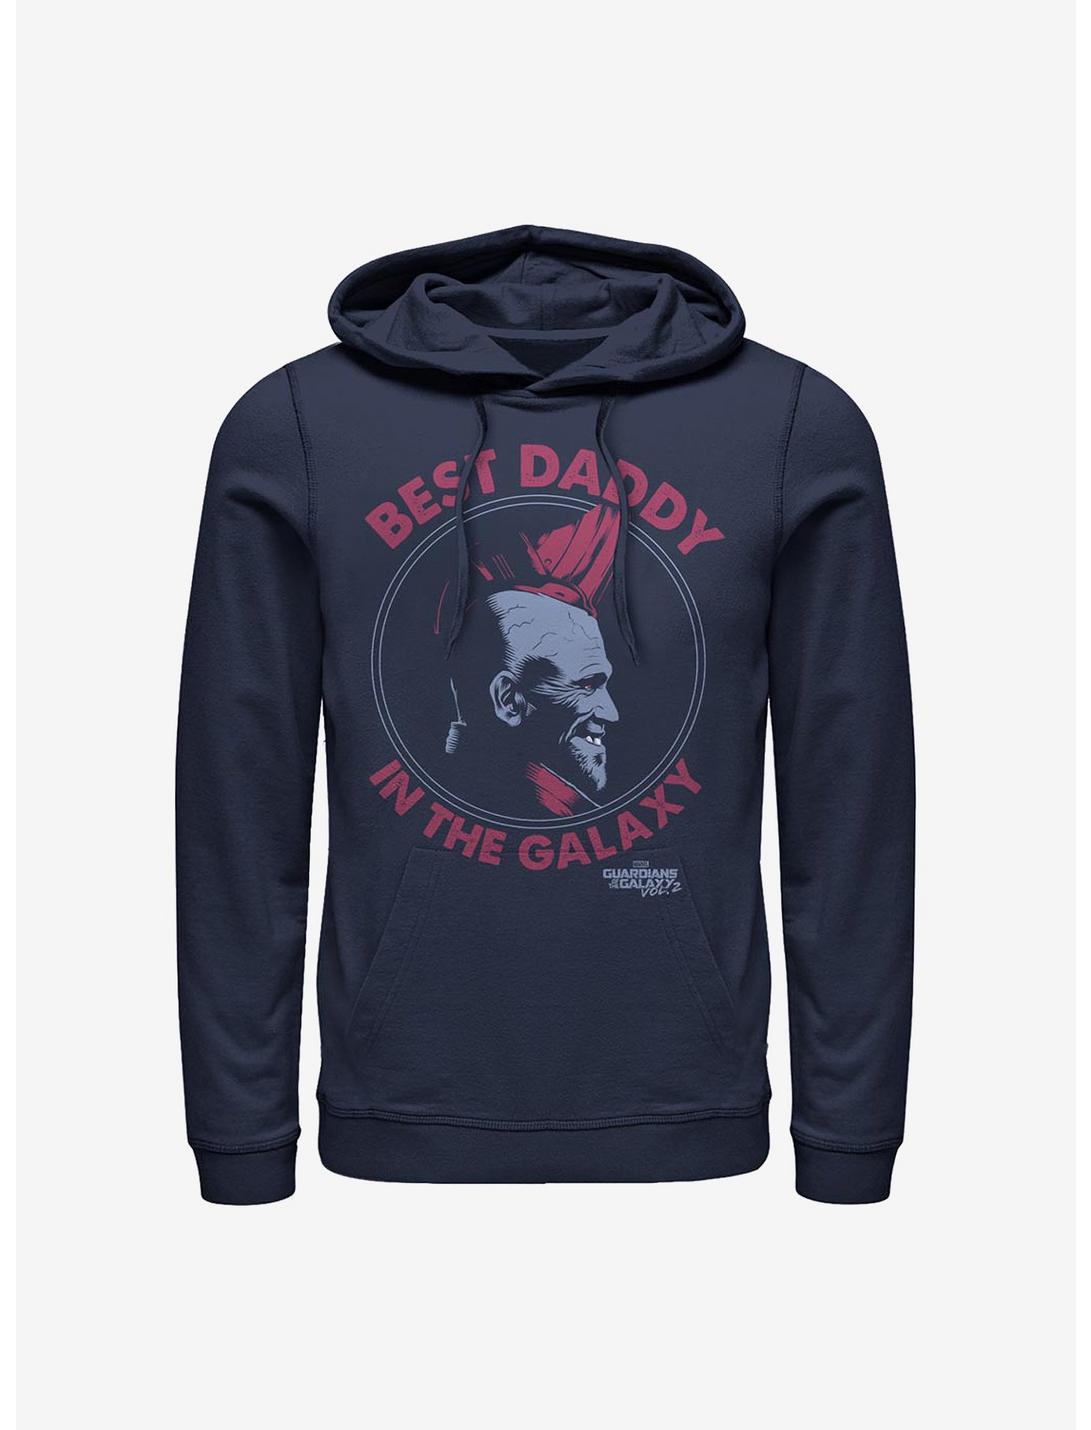 Marvel Guardians Of The Galaxy Best Daddy Hoodie, NAVY, hi-res